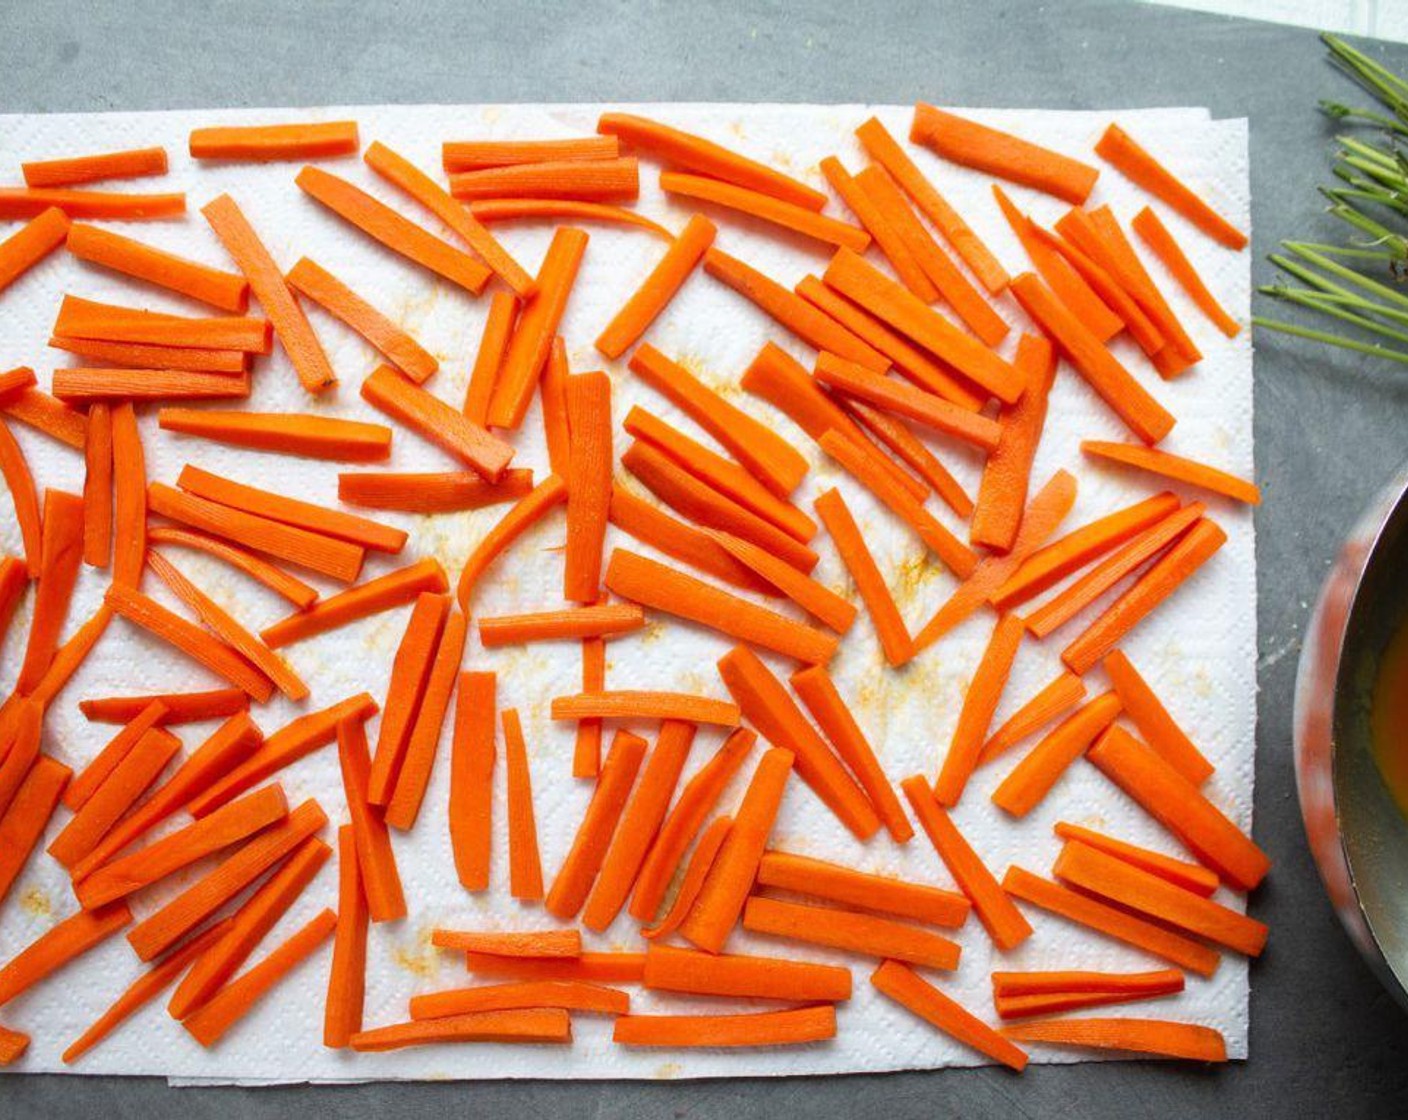 step 3 Dry the carrot sticks on 3 layers of paper towels overnight.